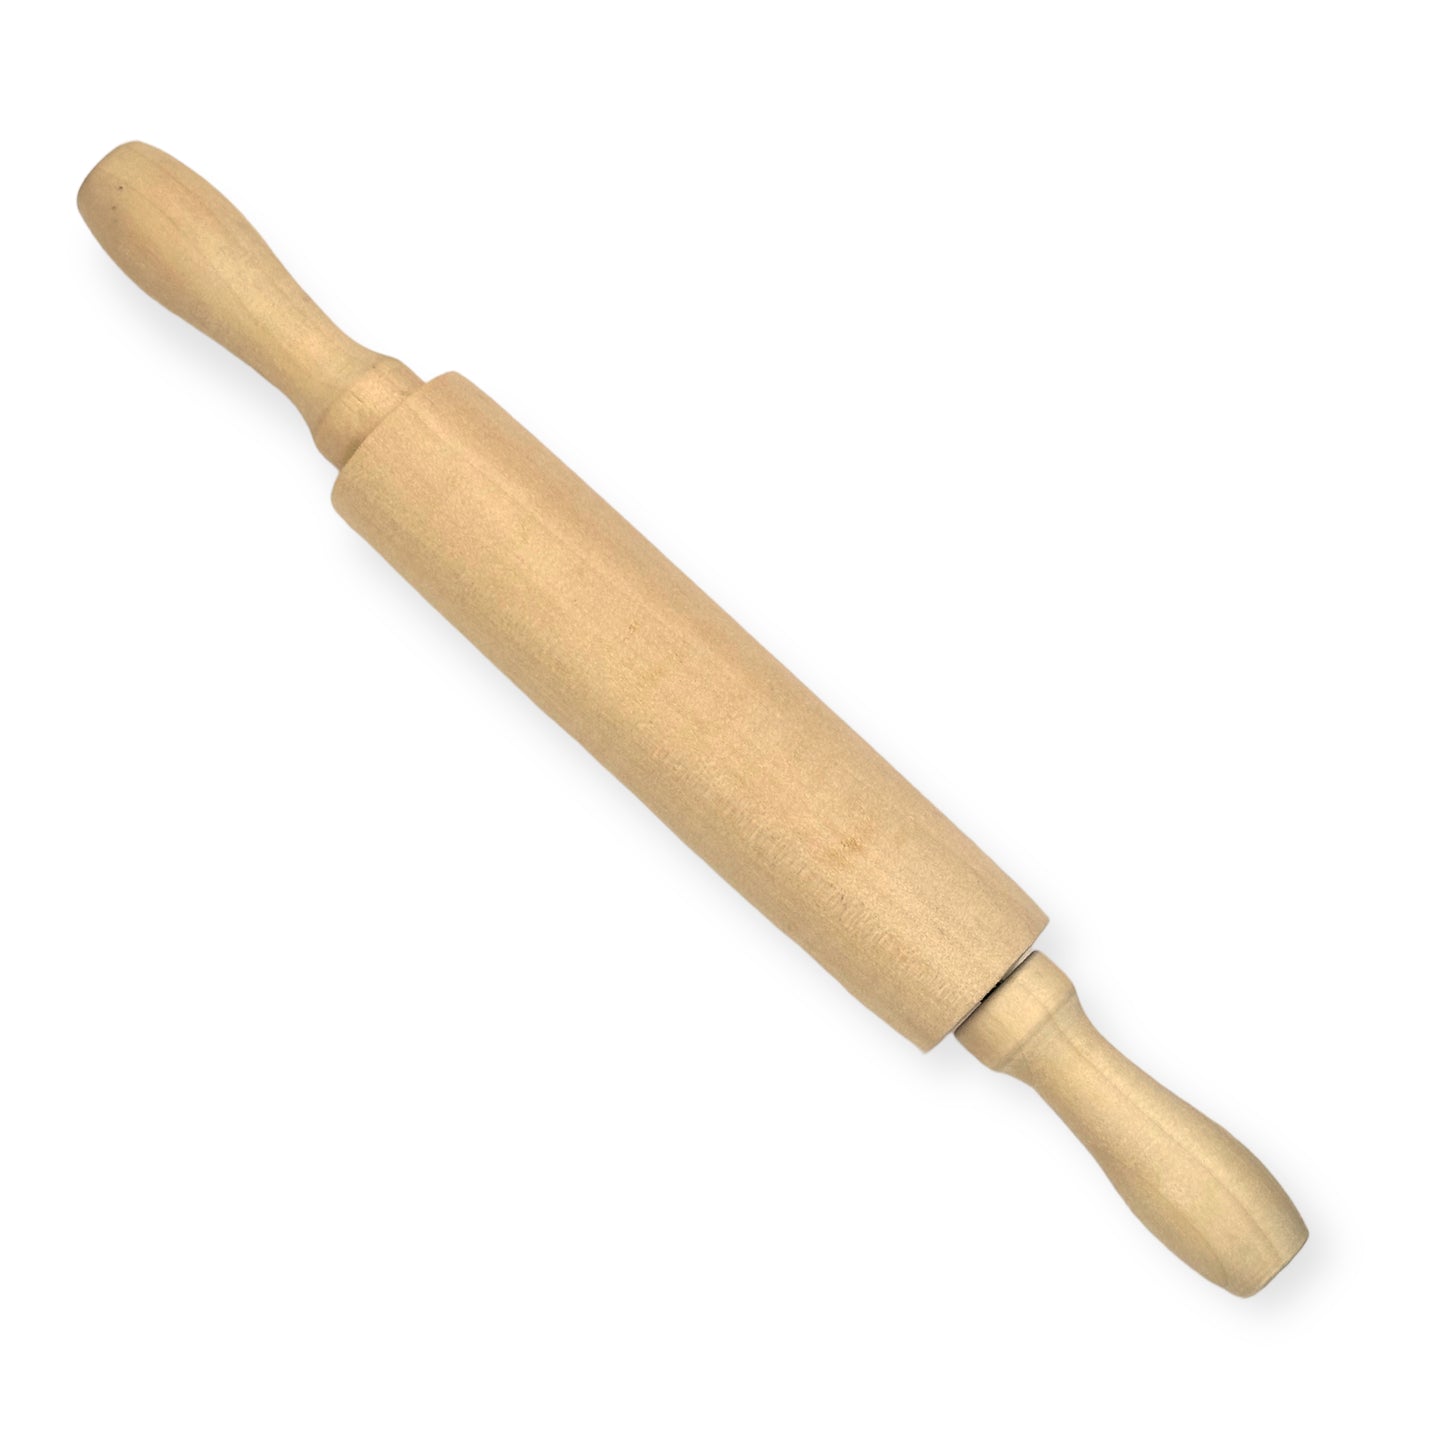 Custom engraved and embossed rolling pins